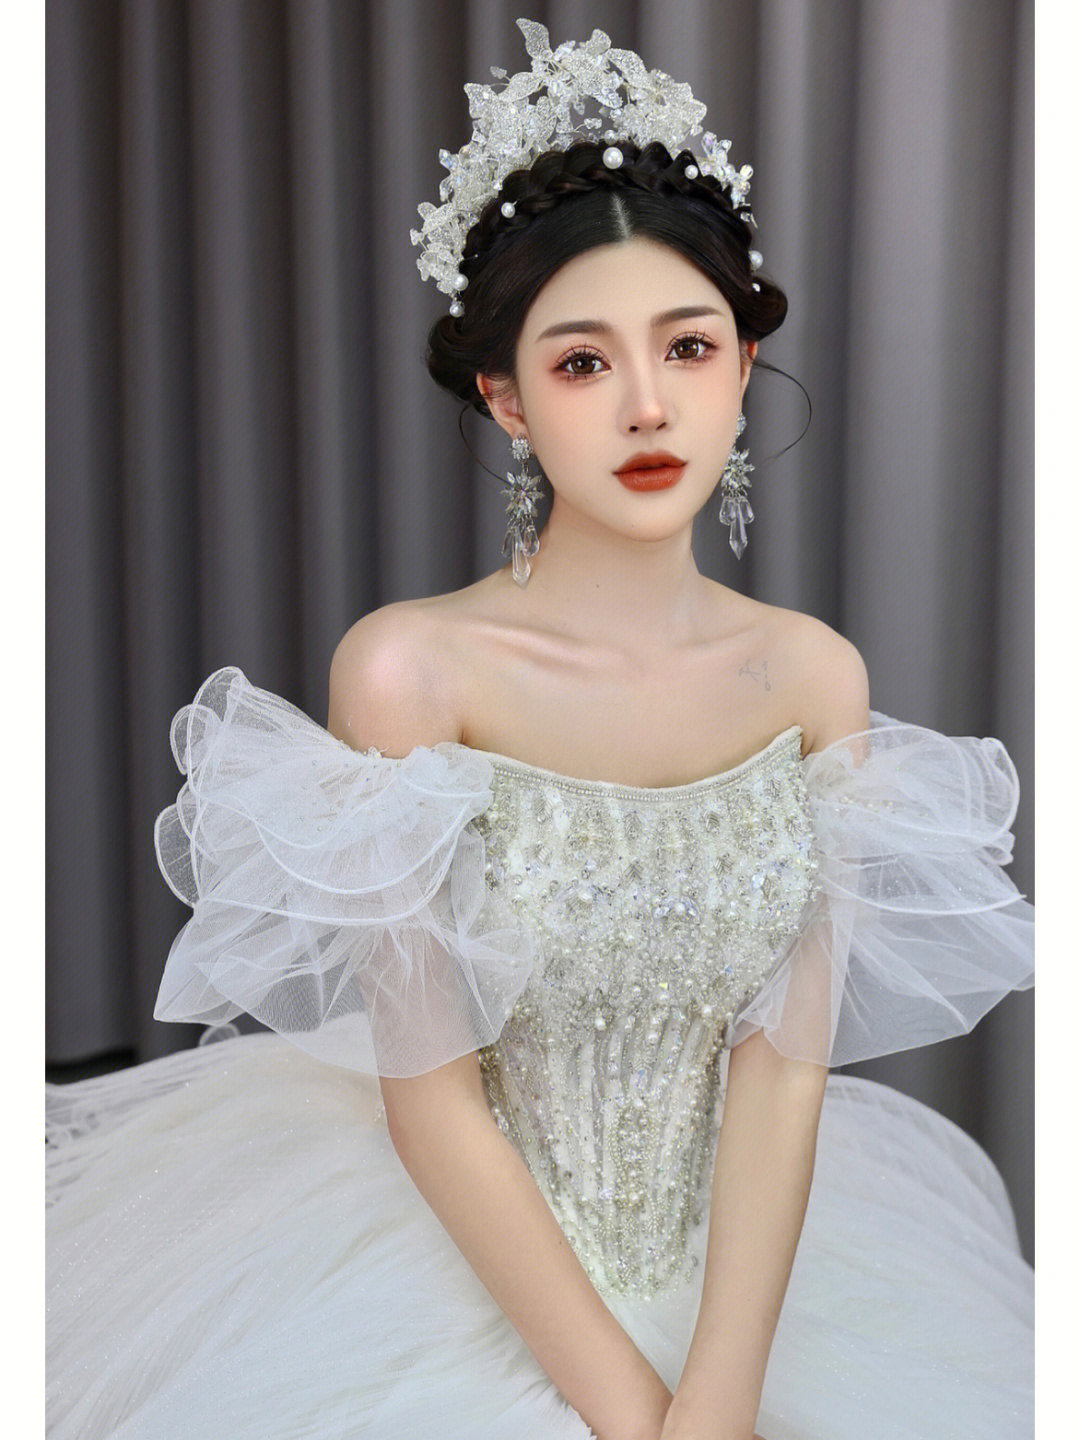 Mexican zombie bride is fake_Mexican bridal shop zombie bride_Mexican zombie The bride is a wax figure